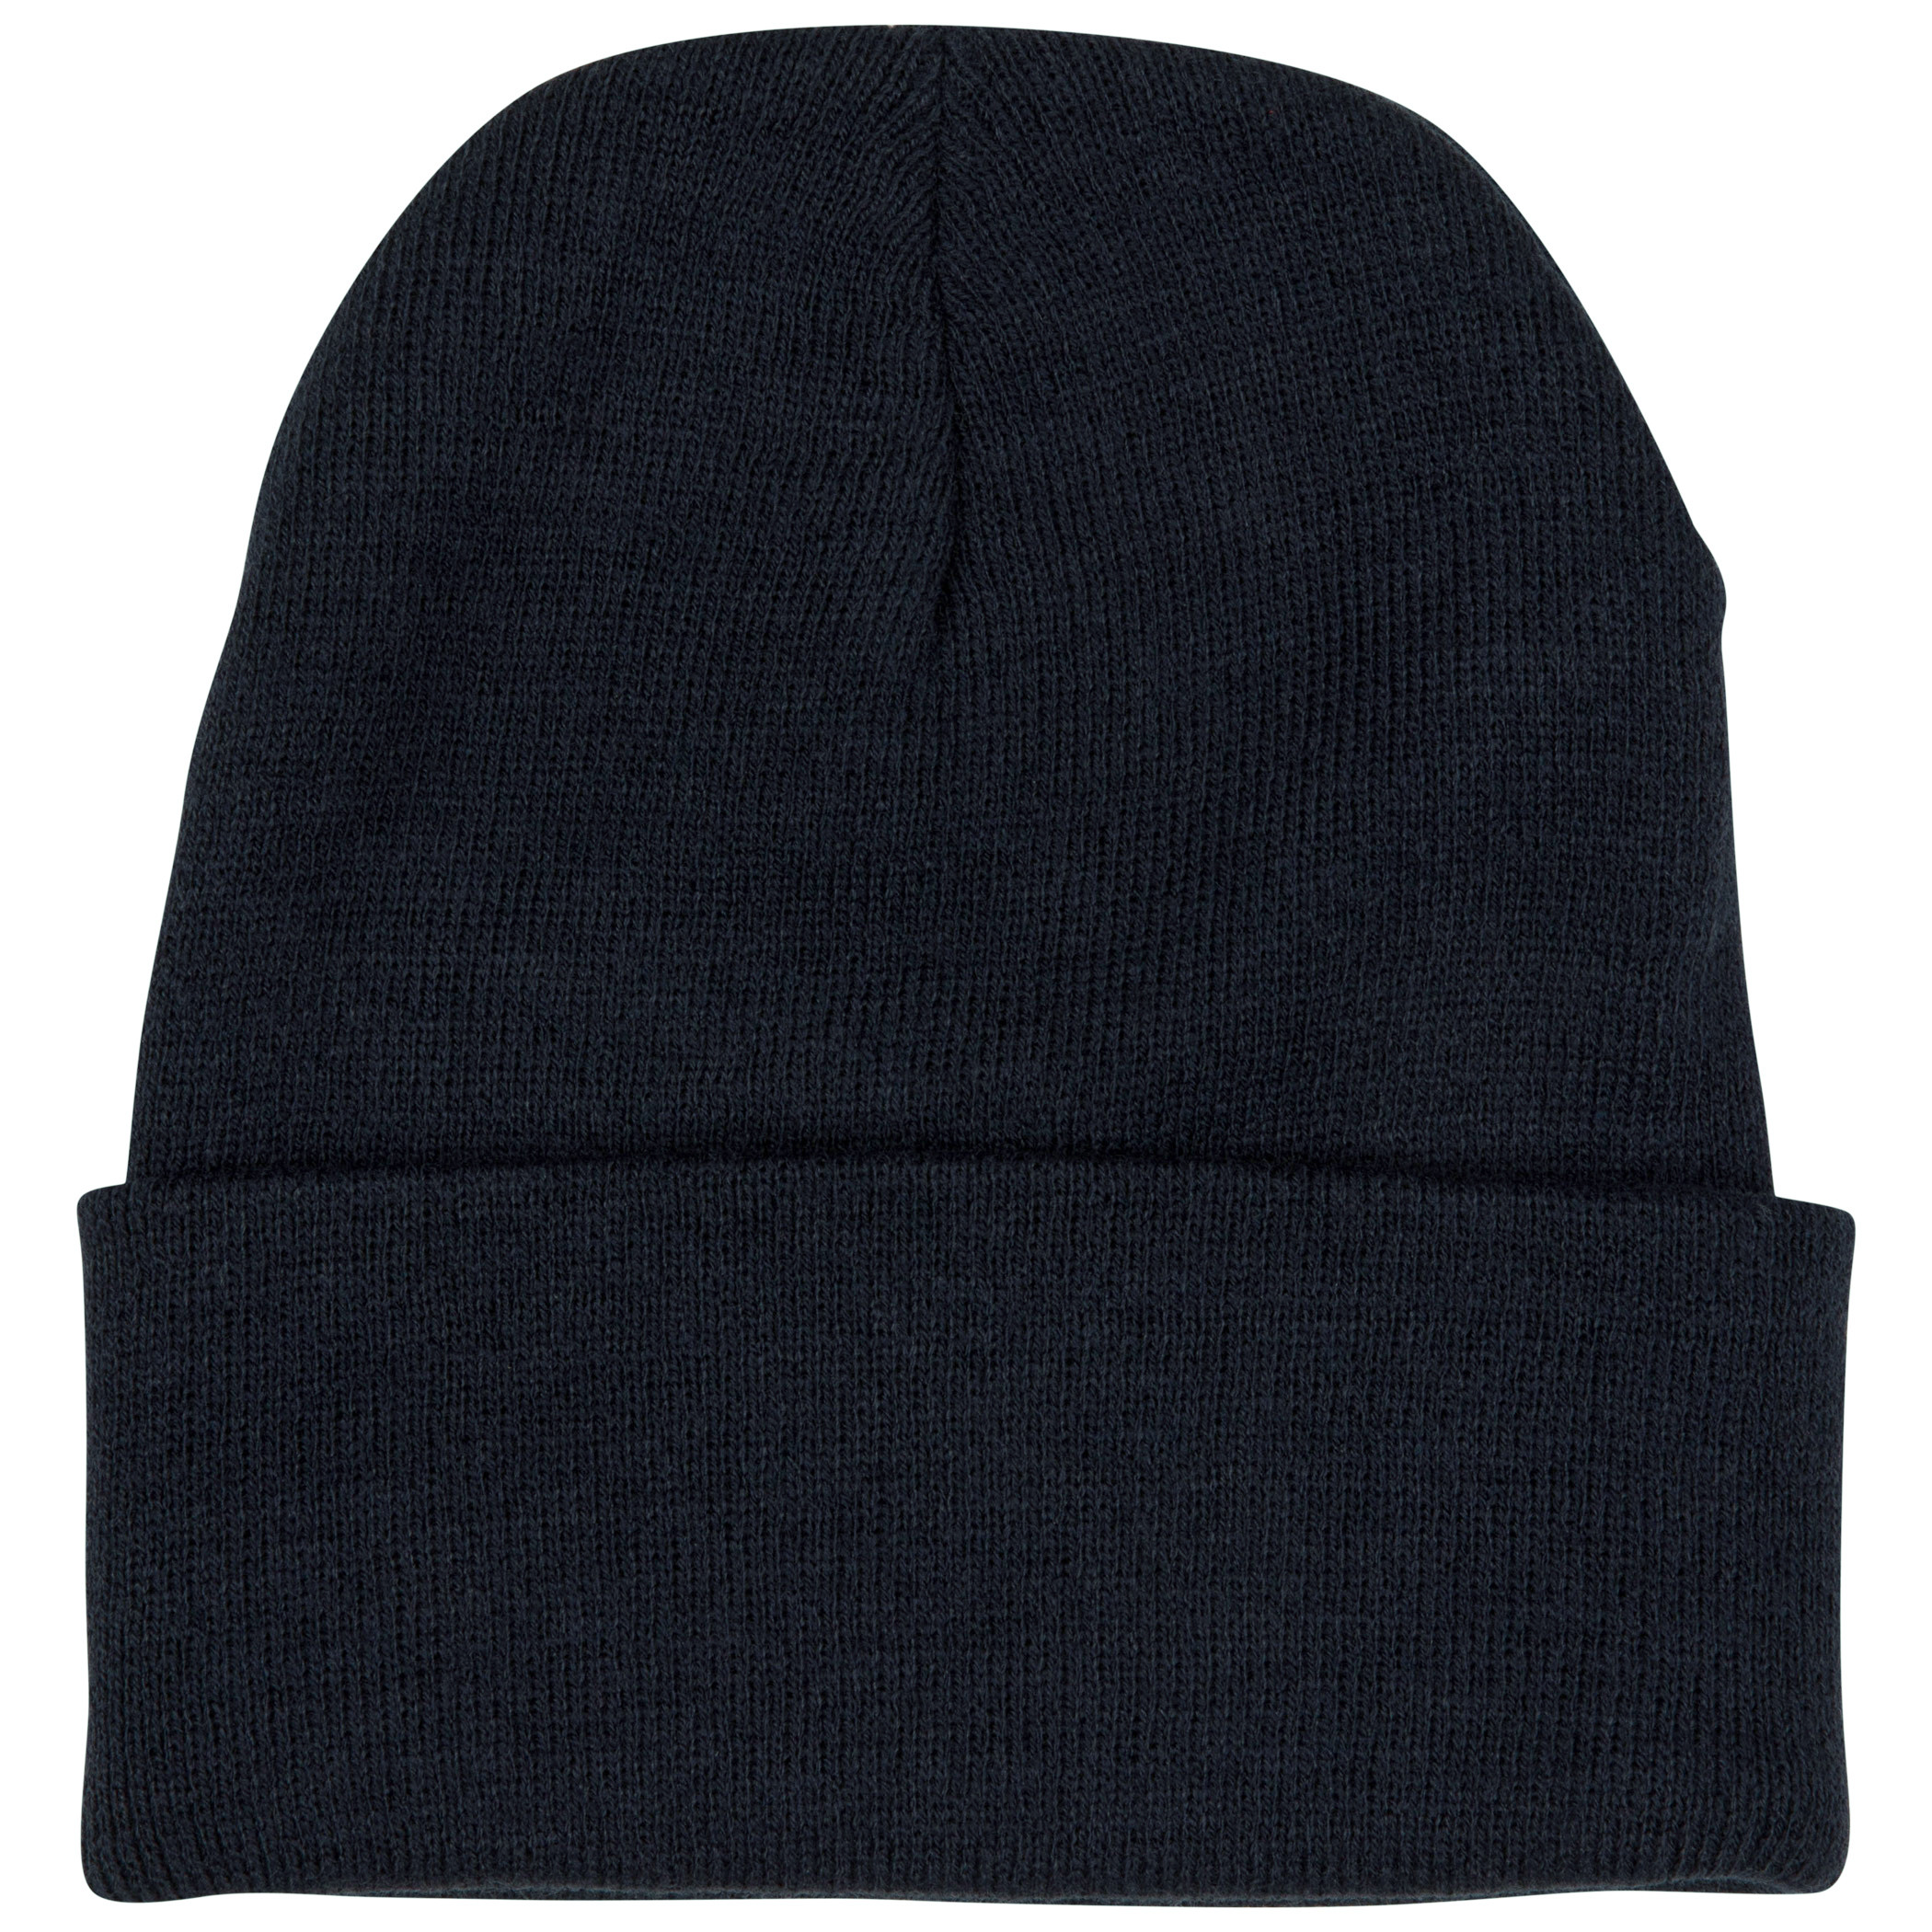 Miller High Life Woven Label Navy Colorway Cuffed Knit Beanie